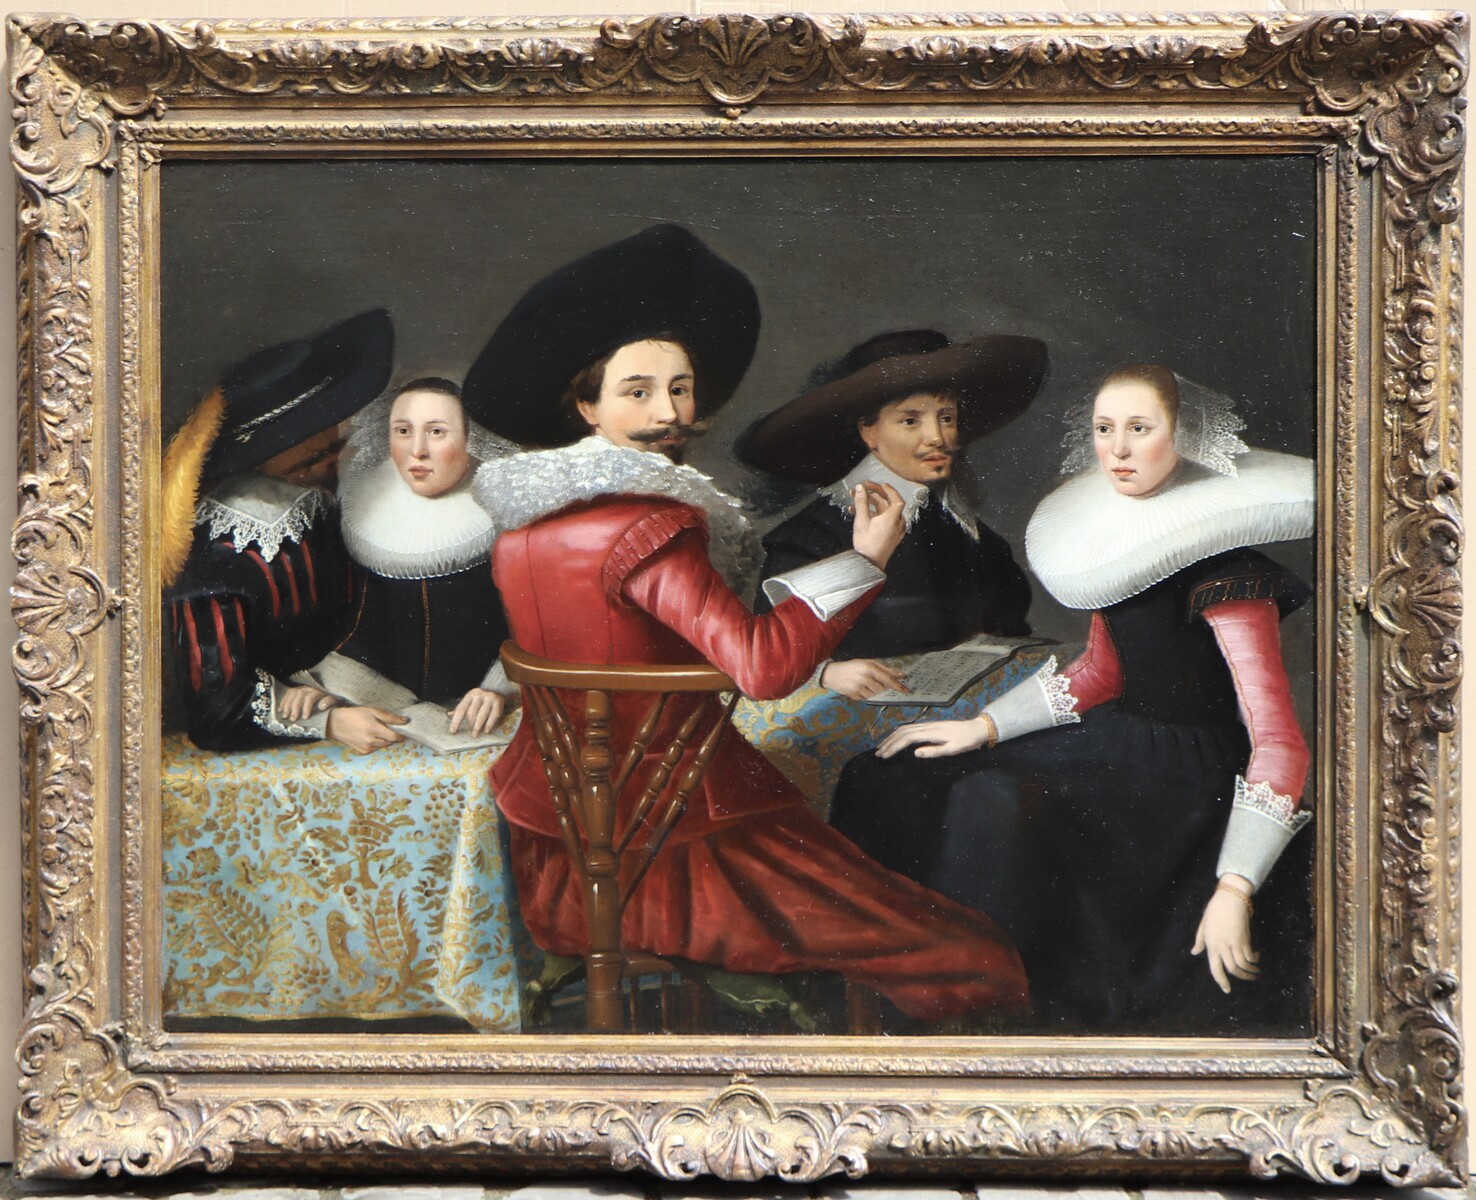 An elegant company of five people singing